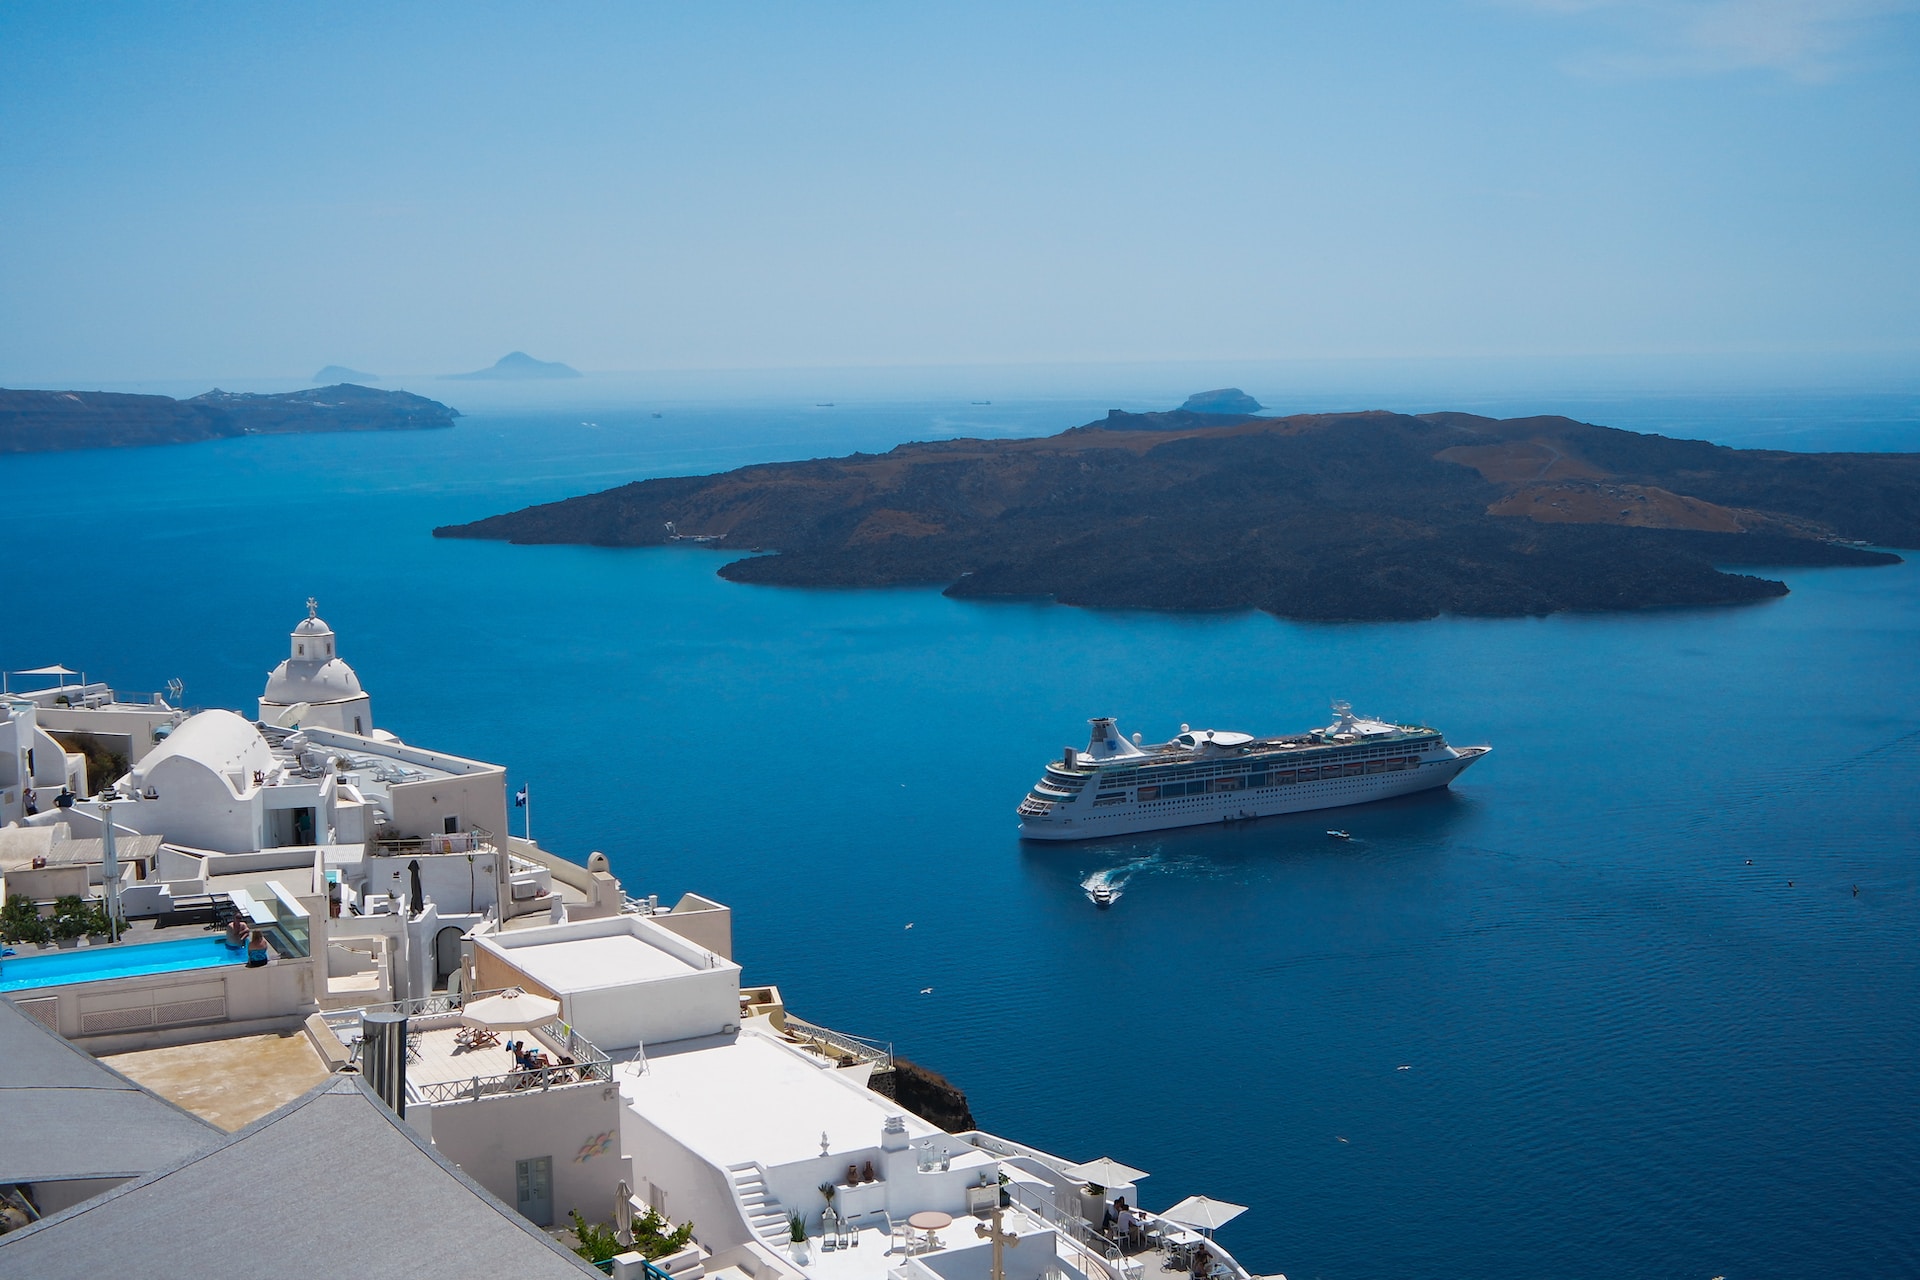 Santorini caldera view with a cruise ship in the background